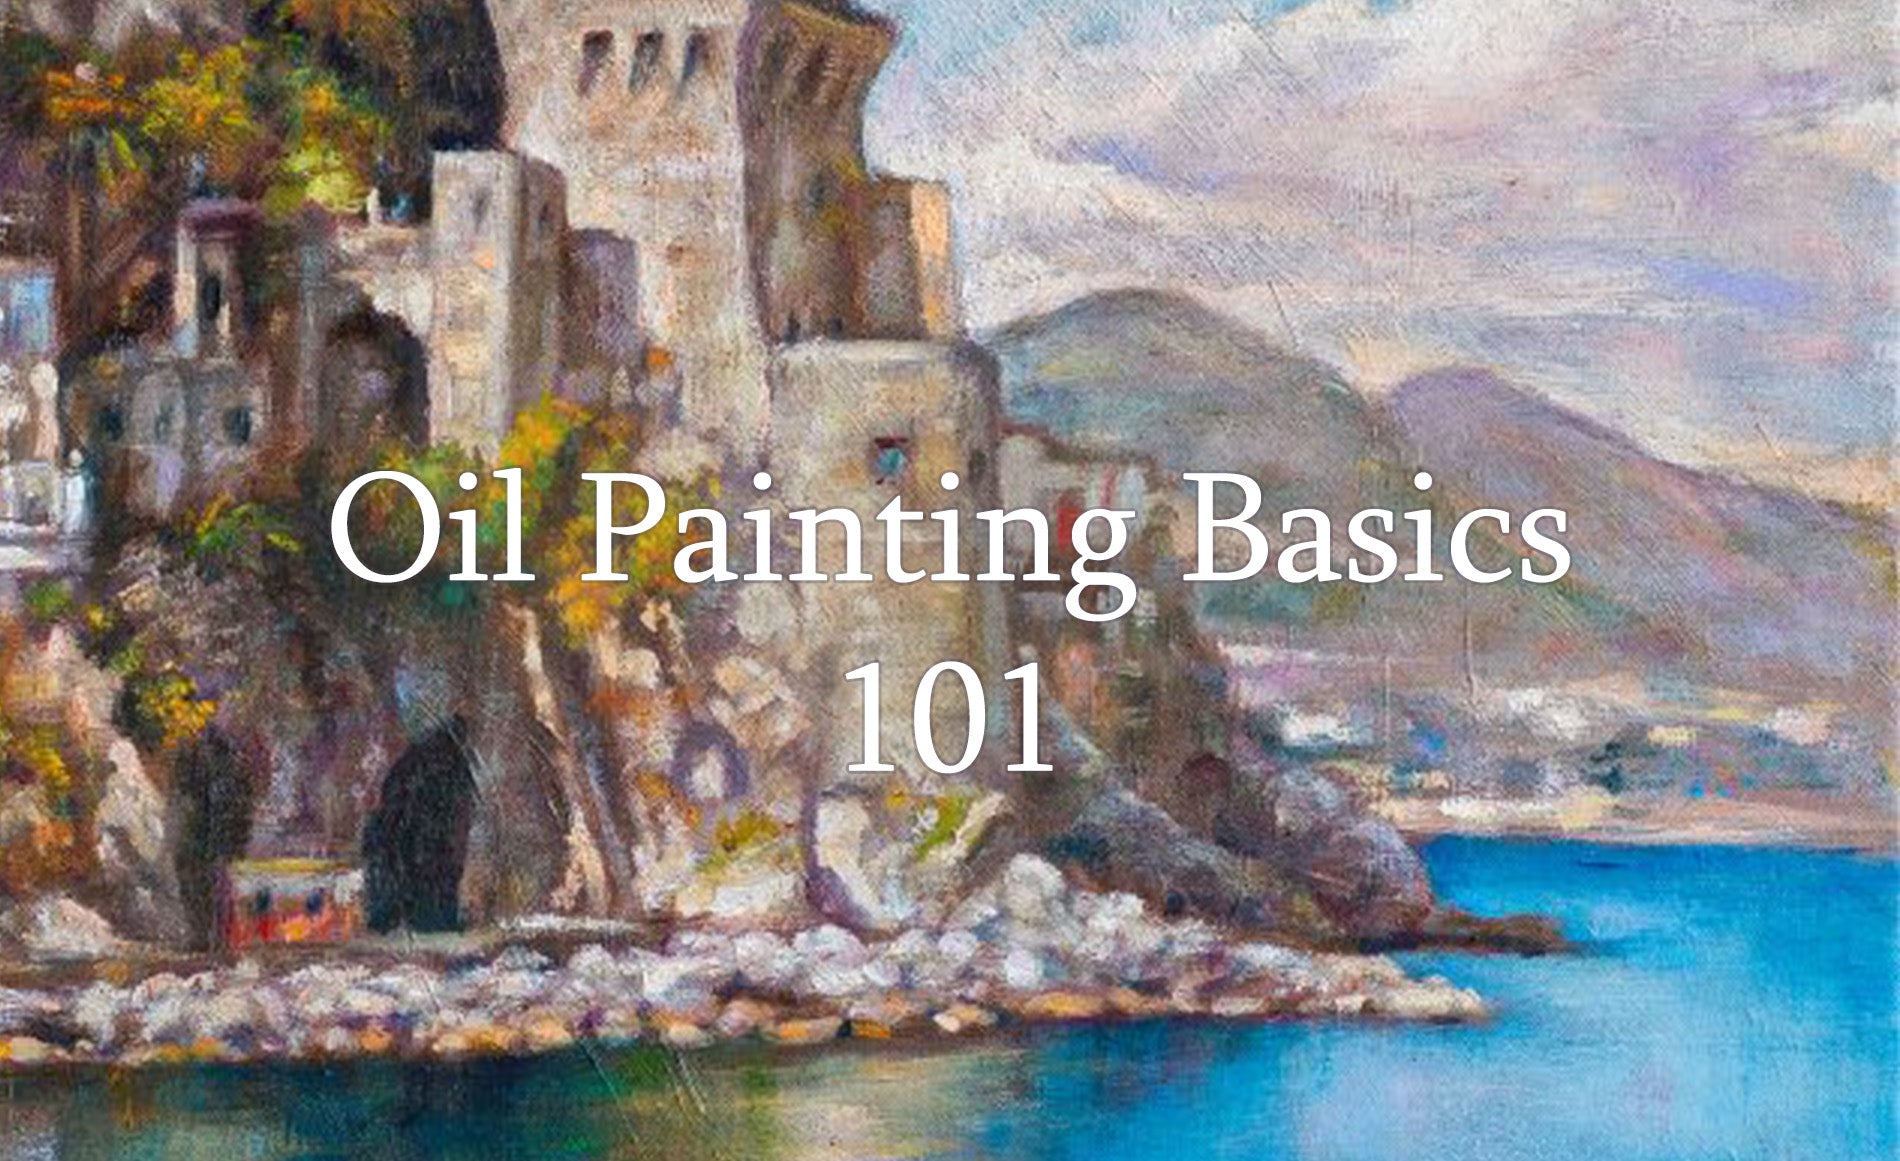 Oil Painting Basics 101: Essential Tips and Information For Beginner Artists